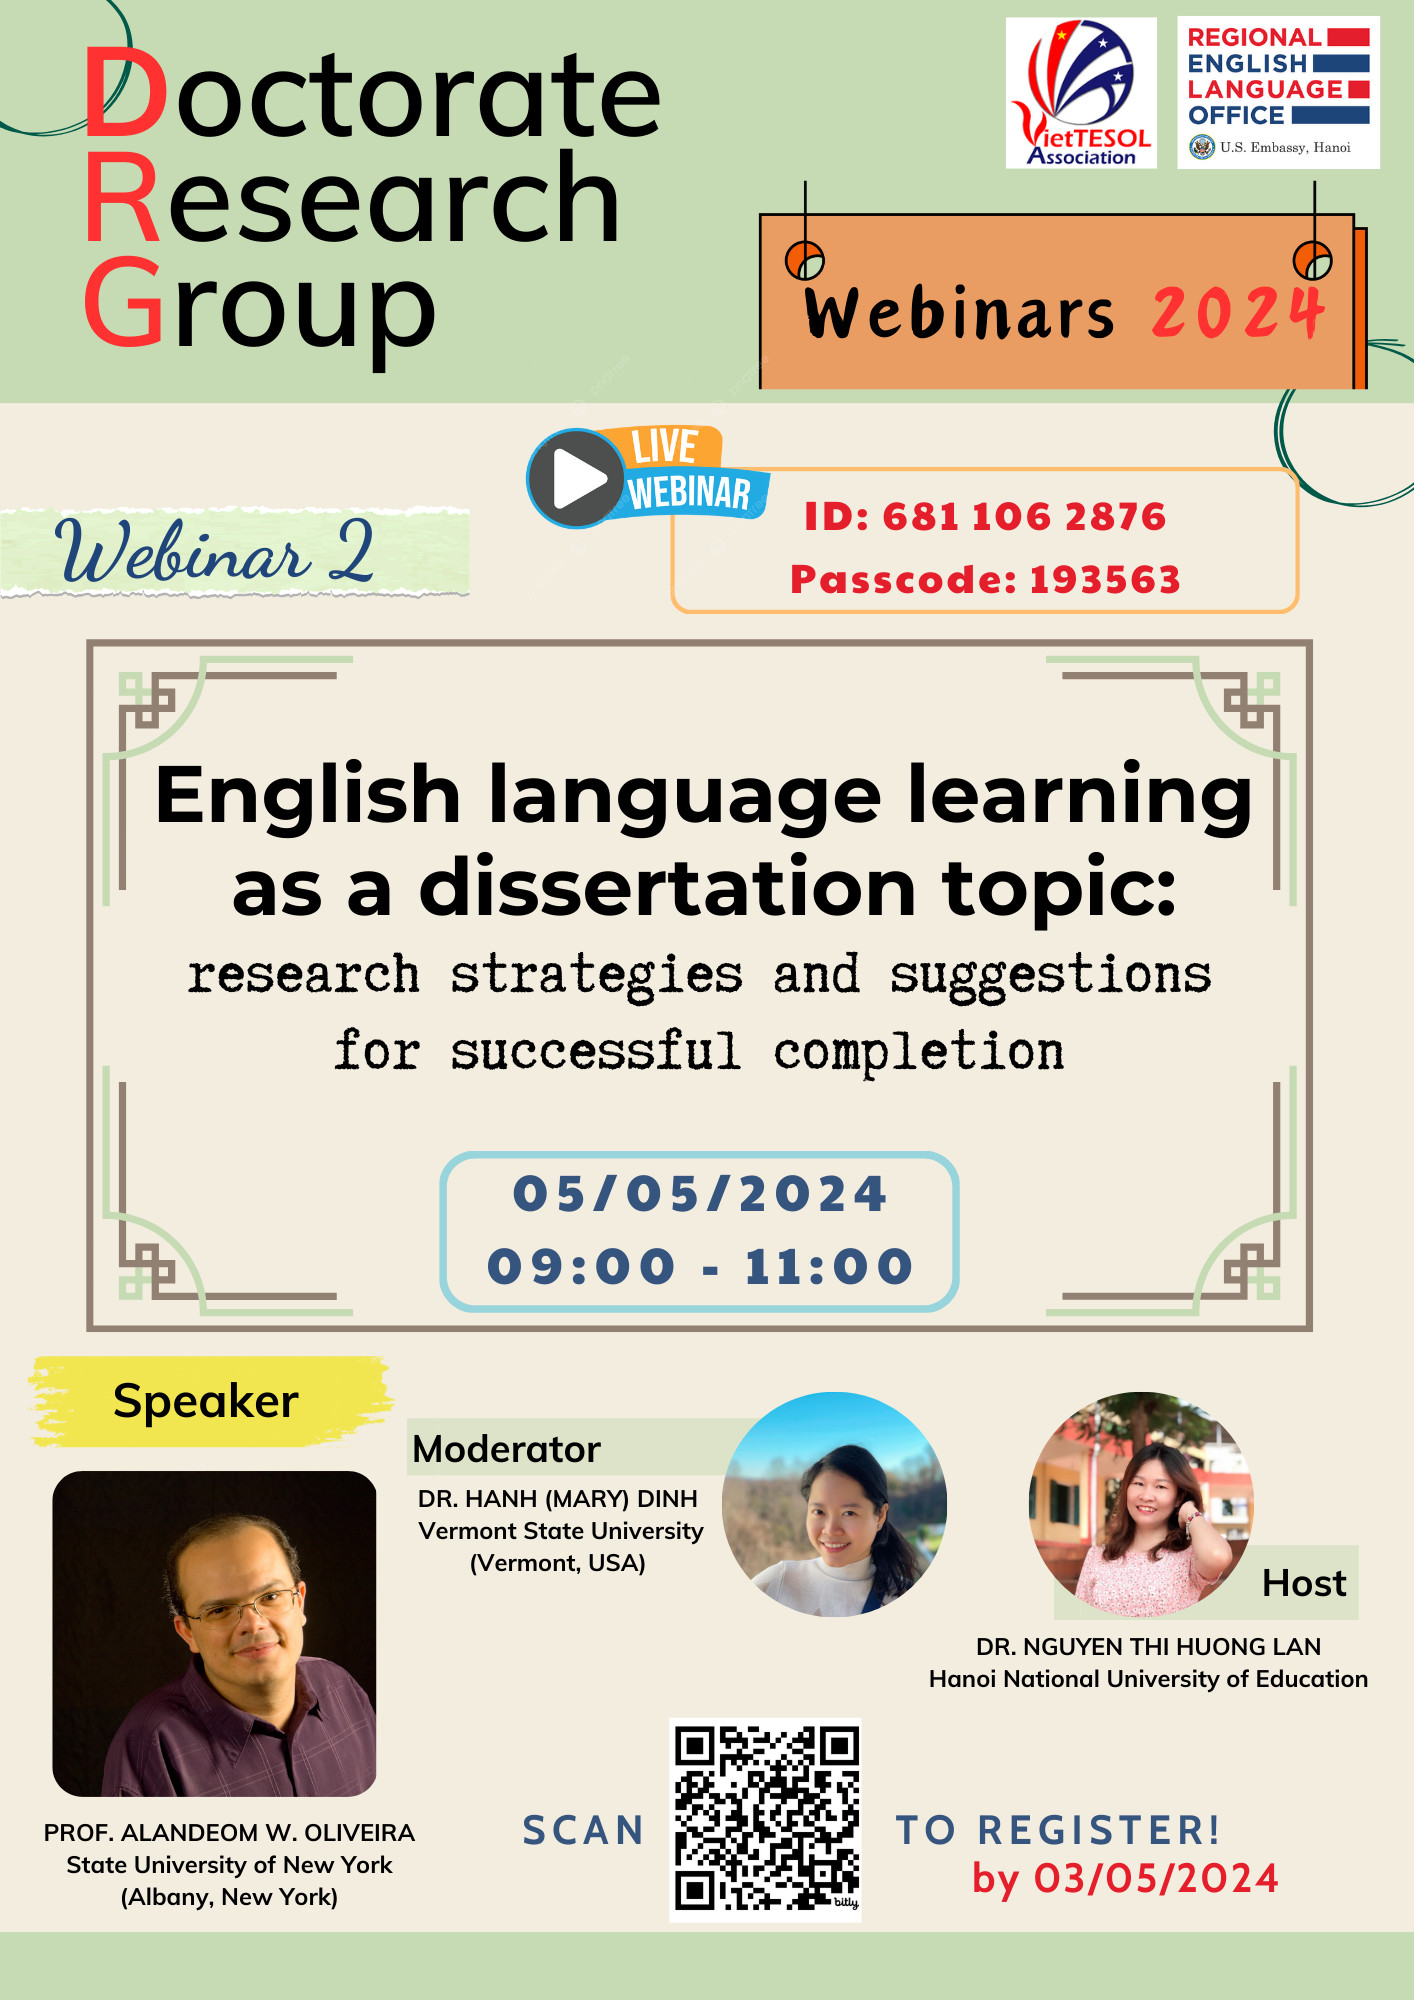 DOCTORATE RESEARCH GROUP WEBINAR 2